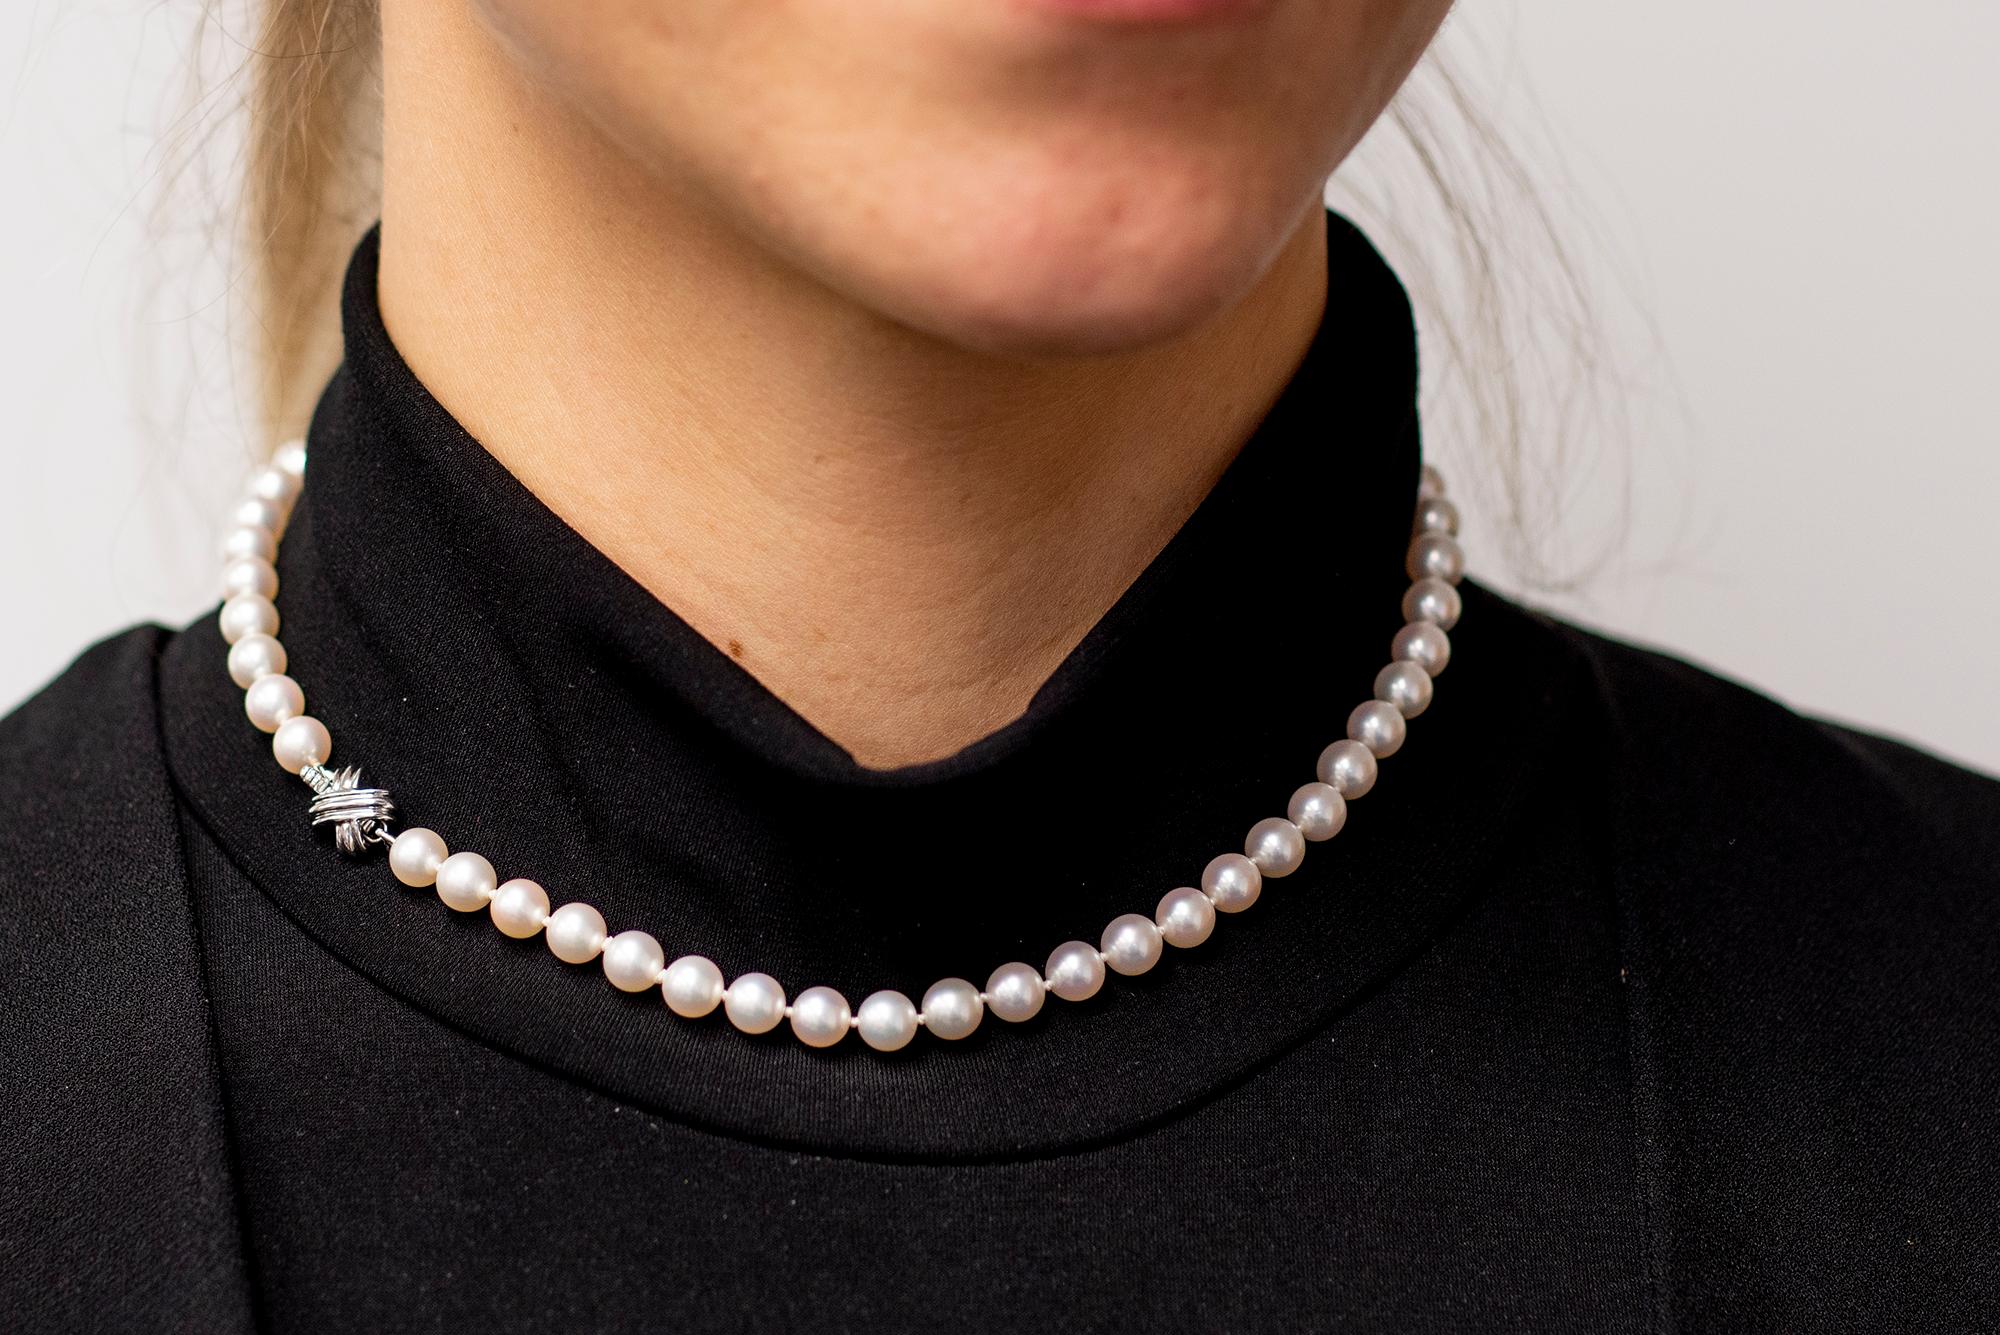 Tiffany & Co. 18 Karat White Gold Cultured Pearl Necklace In Excellent Condition For Sale In Nashua, NH